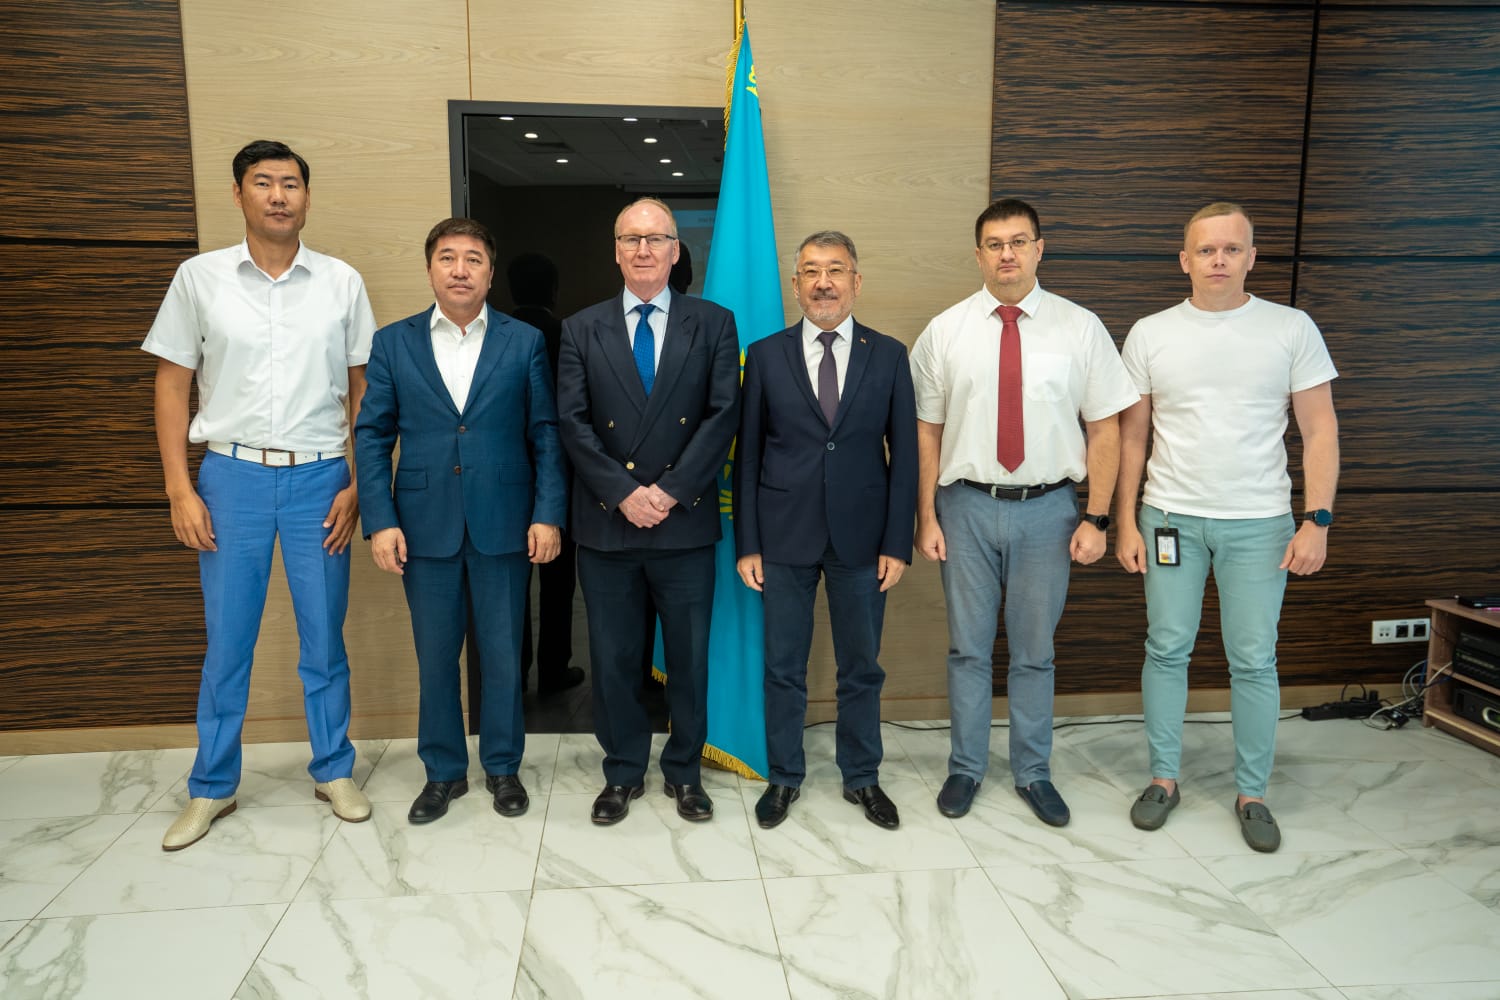 ISTC met with the Astana IT University for awarding Japanese Funded travel grants